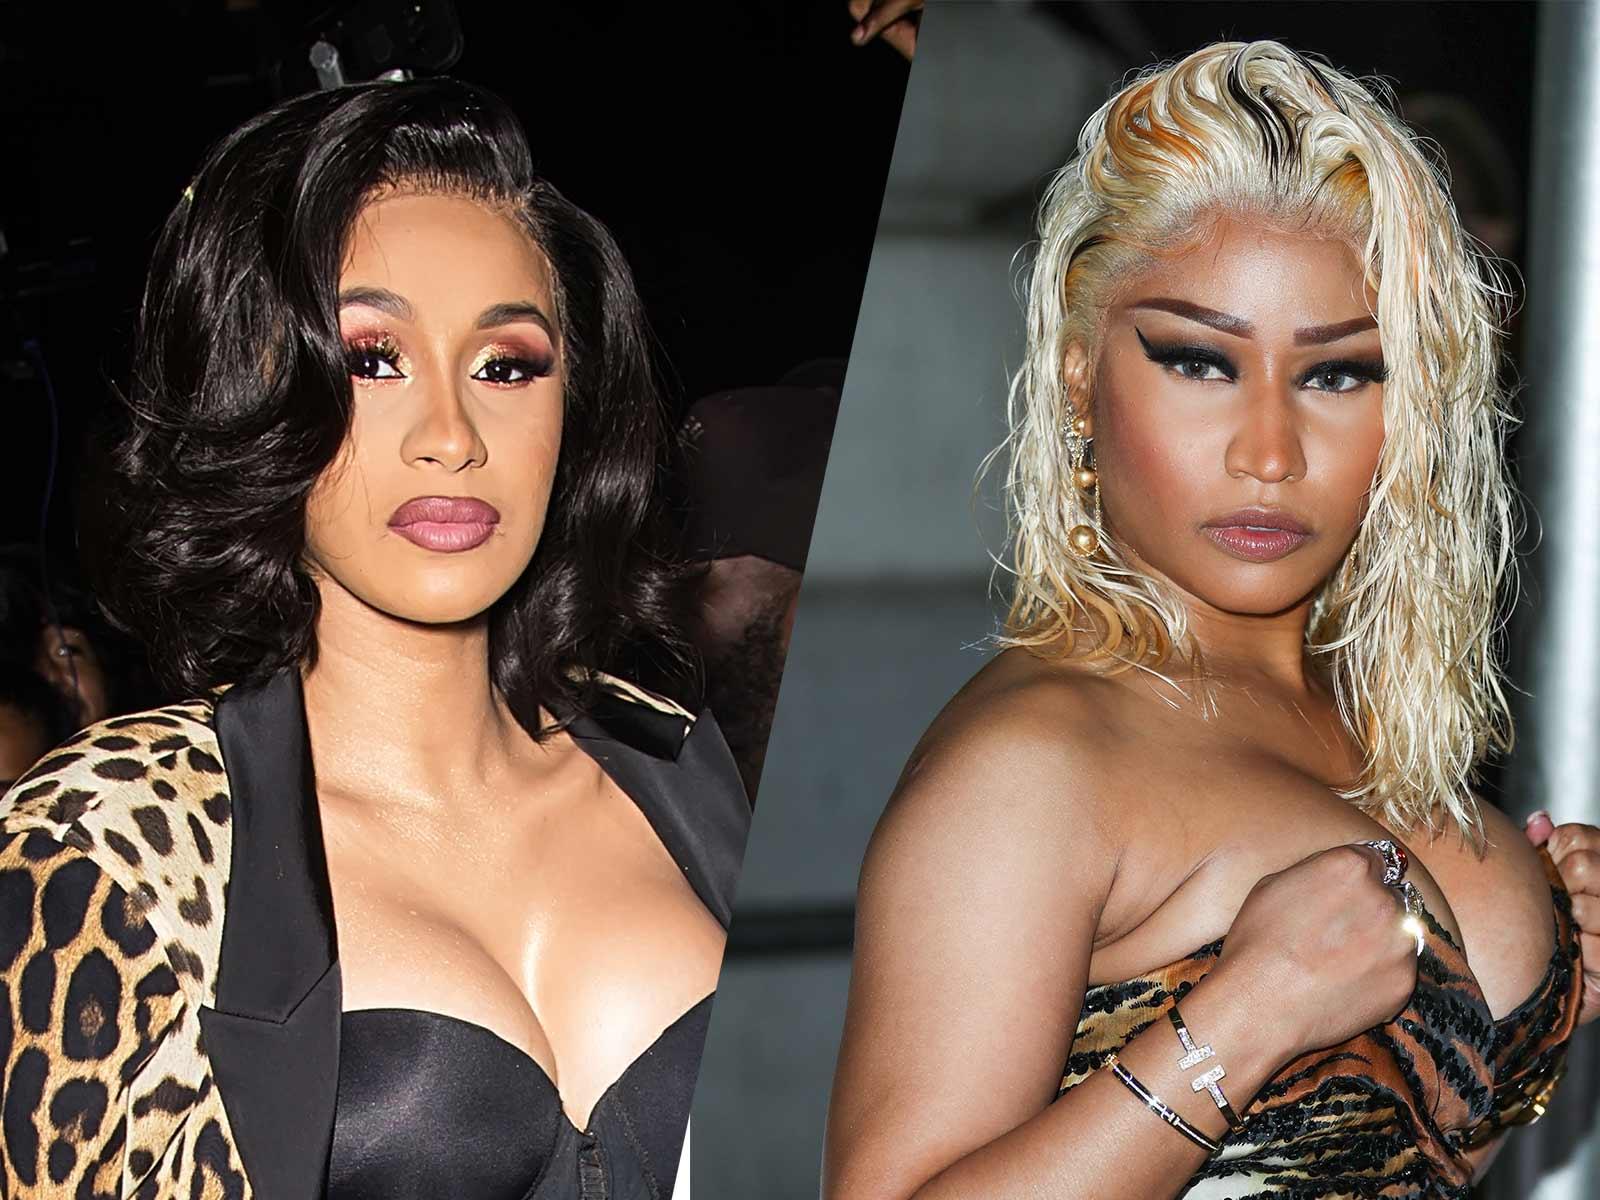 Cardi B’s Team Says Its ‘Absolutely False’ Payola Was Given for Airplay, Despite Nicki Minaj’s Accusation